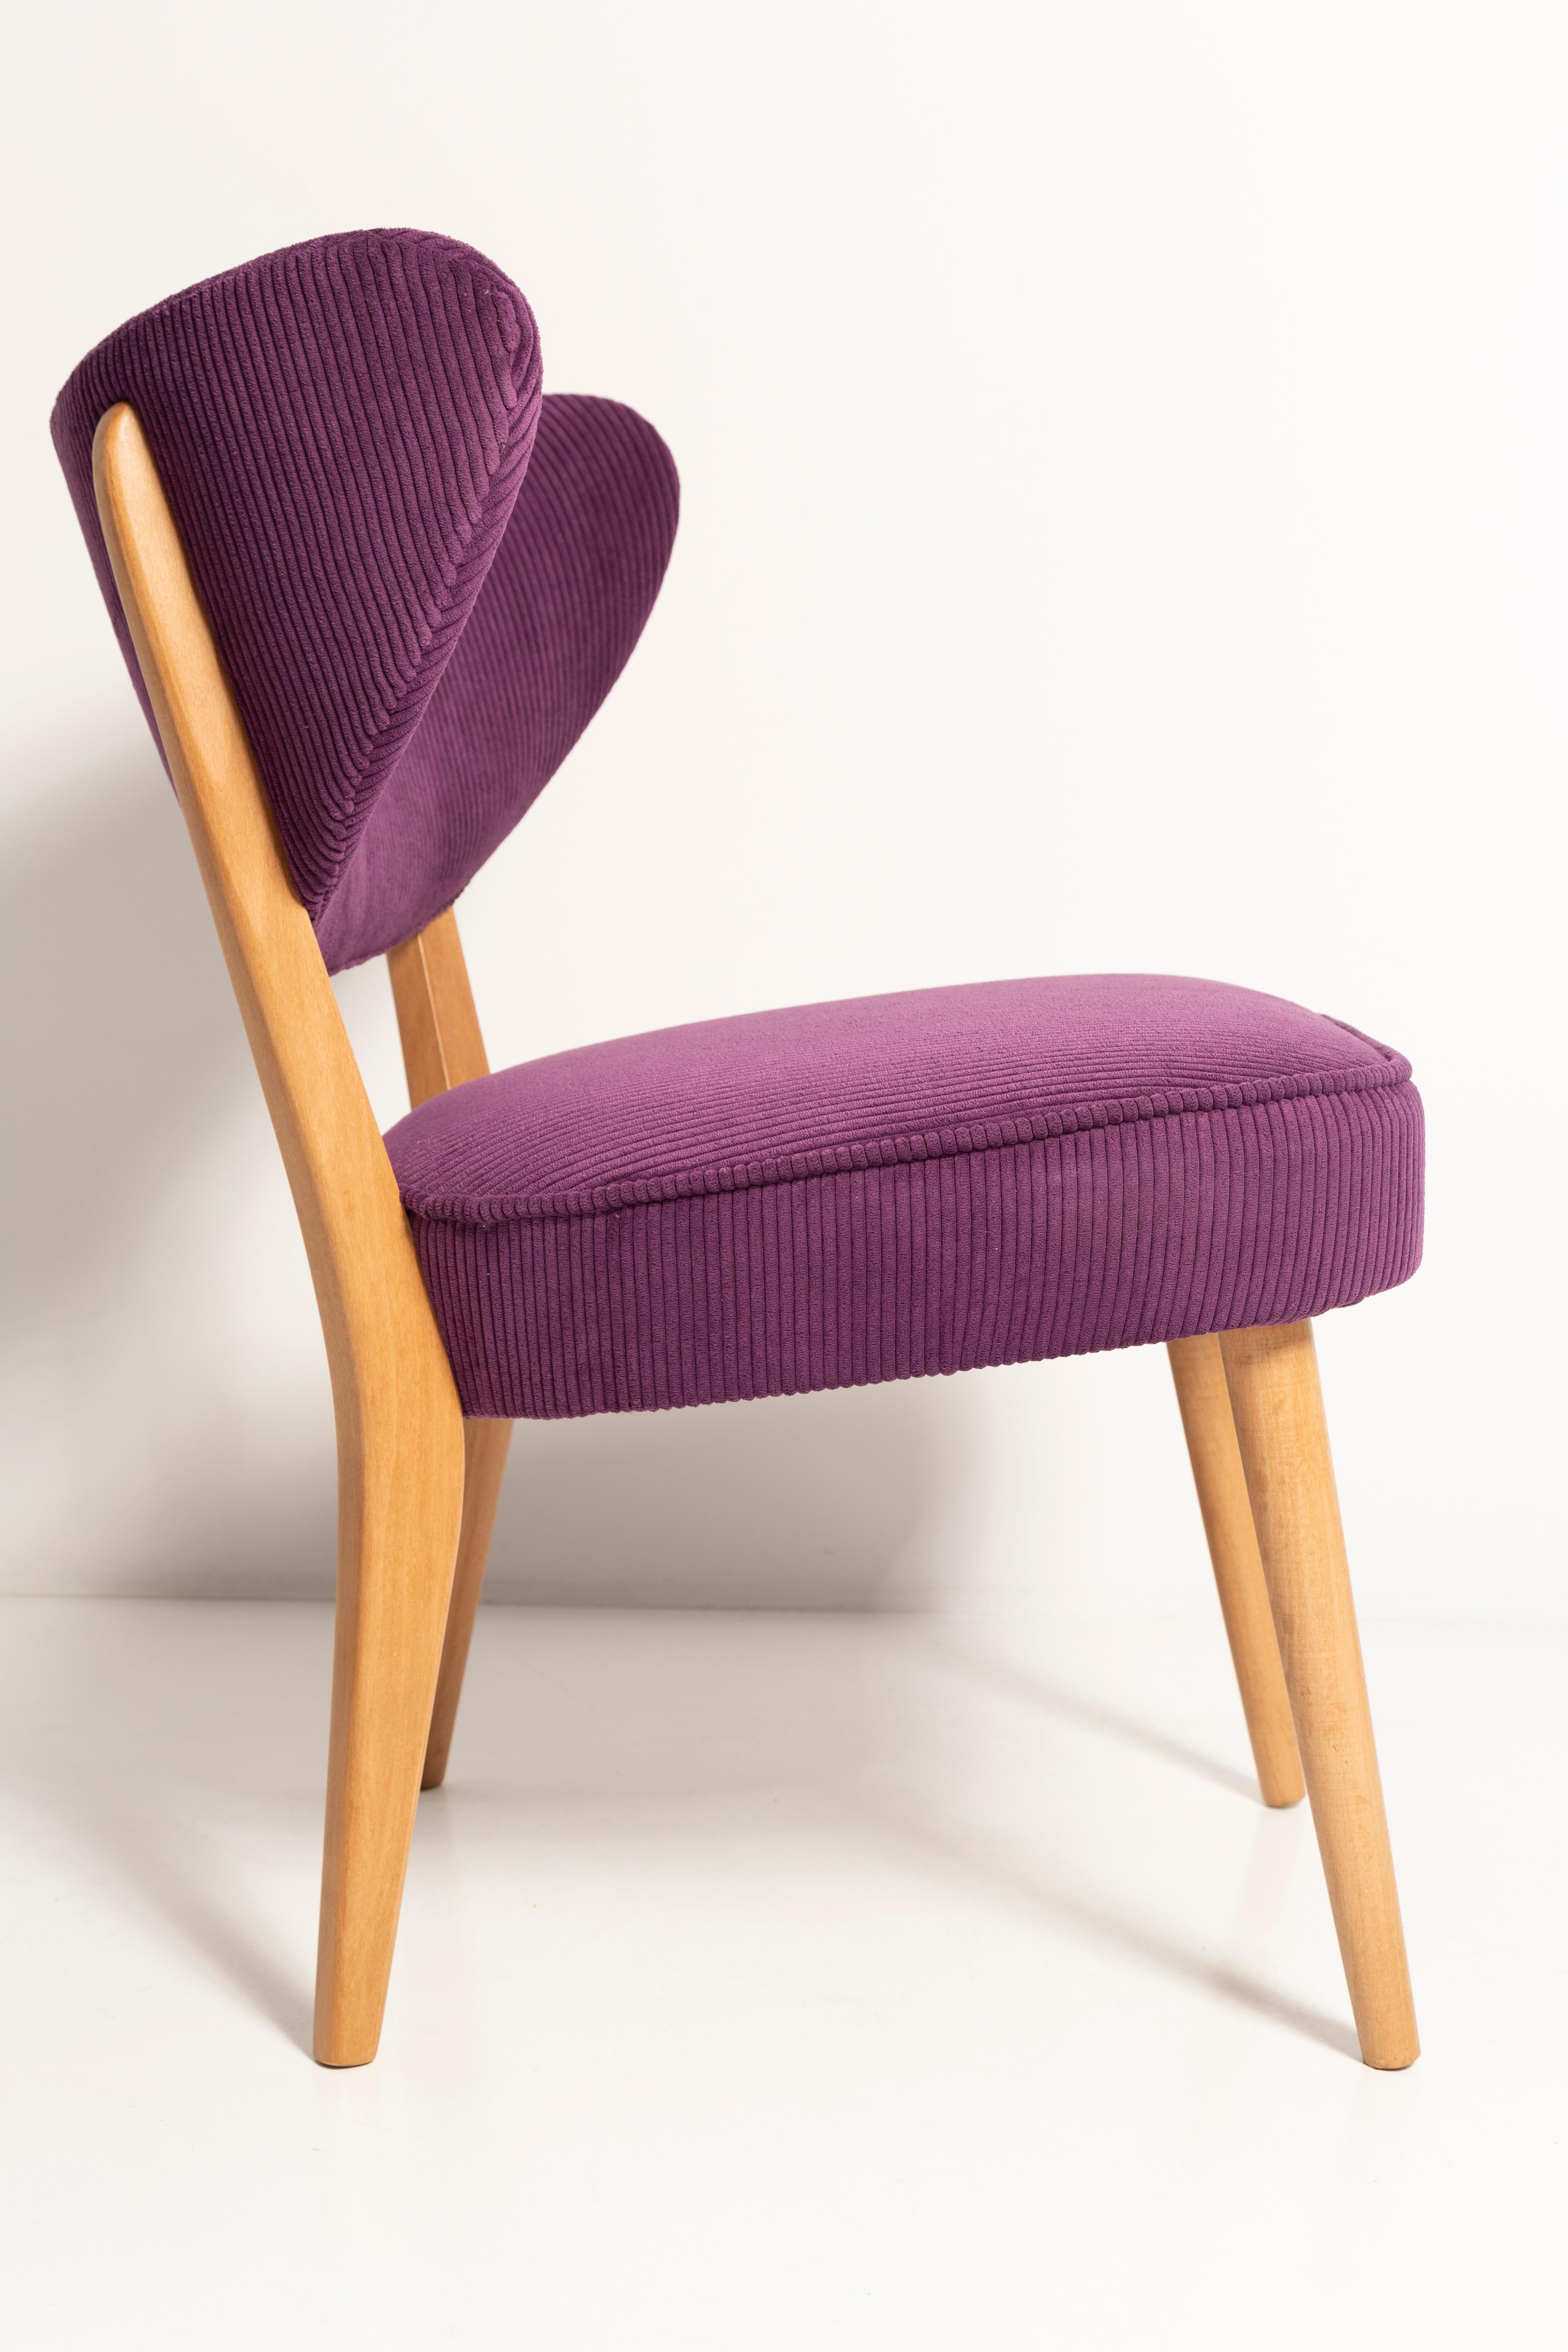 Hand-Painted Pair of Midcentury Style Violet Velvet Club Chairs, by Vintola Studio, Europe For Sale